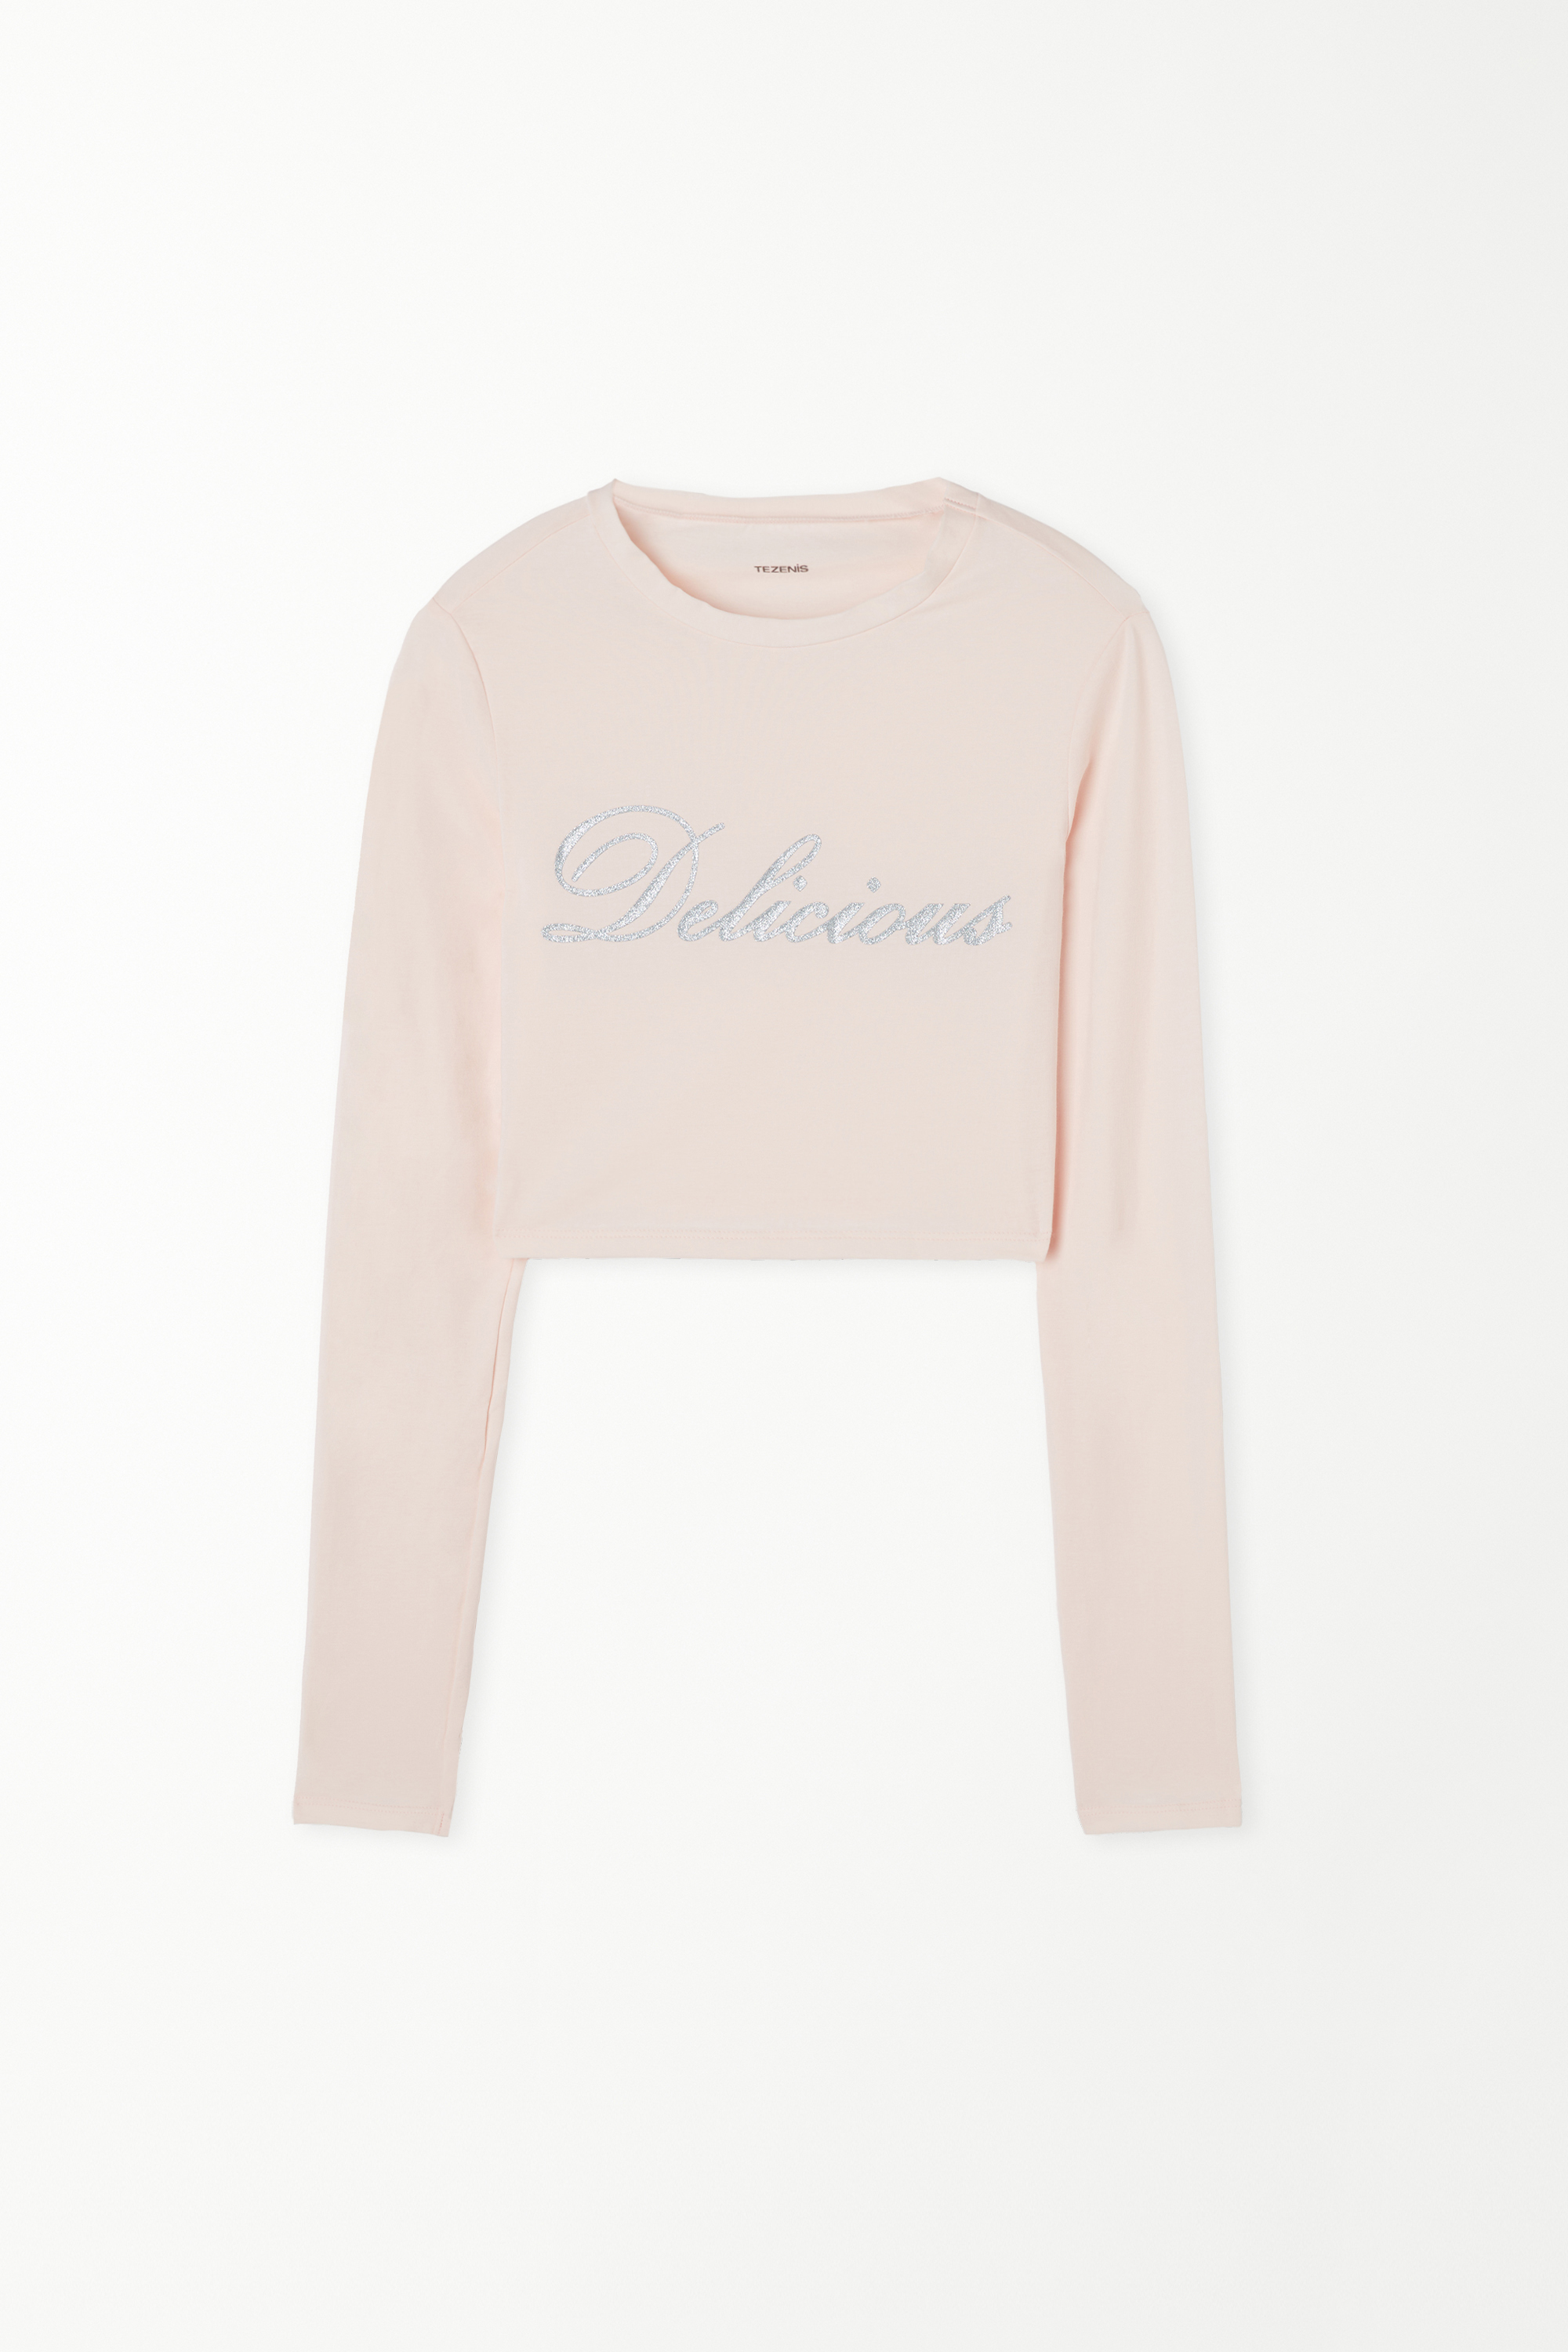 Cropped Long-Sleeved Cotton Top with Writing